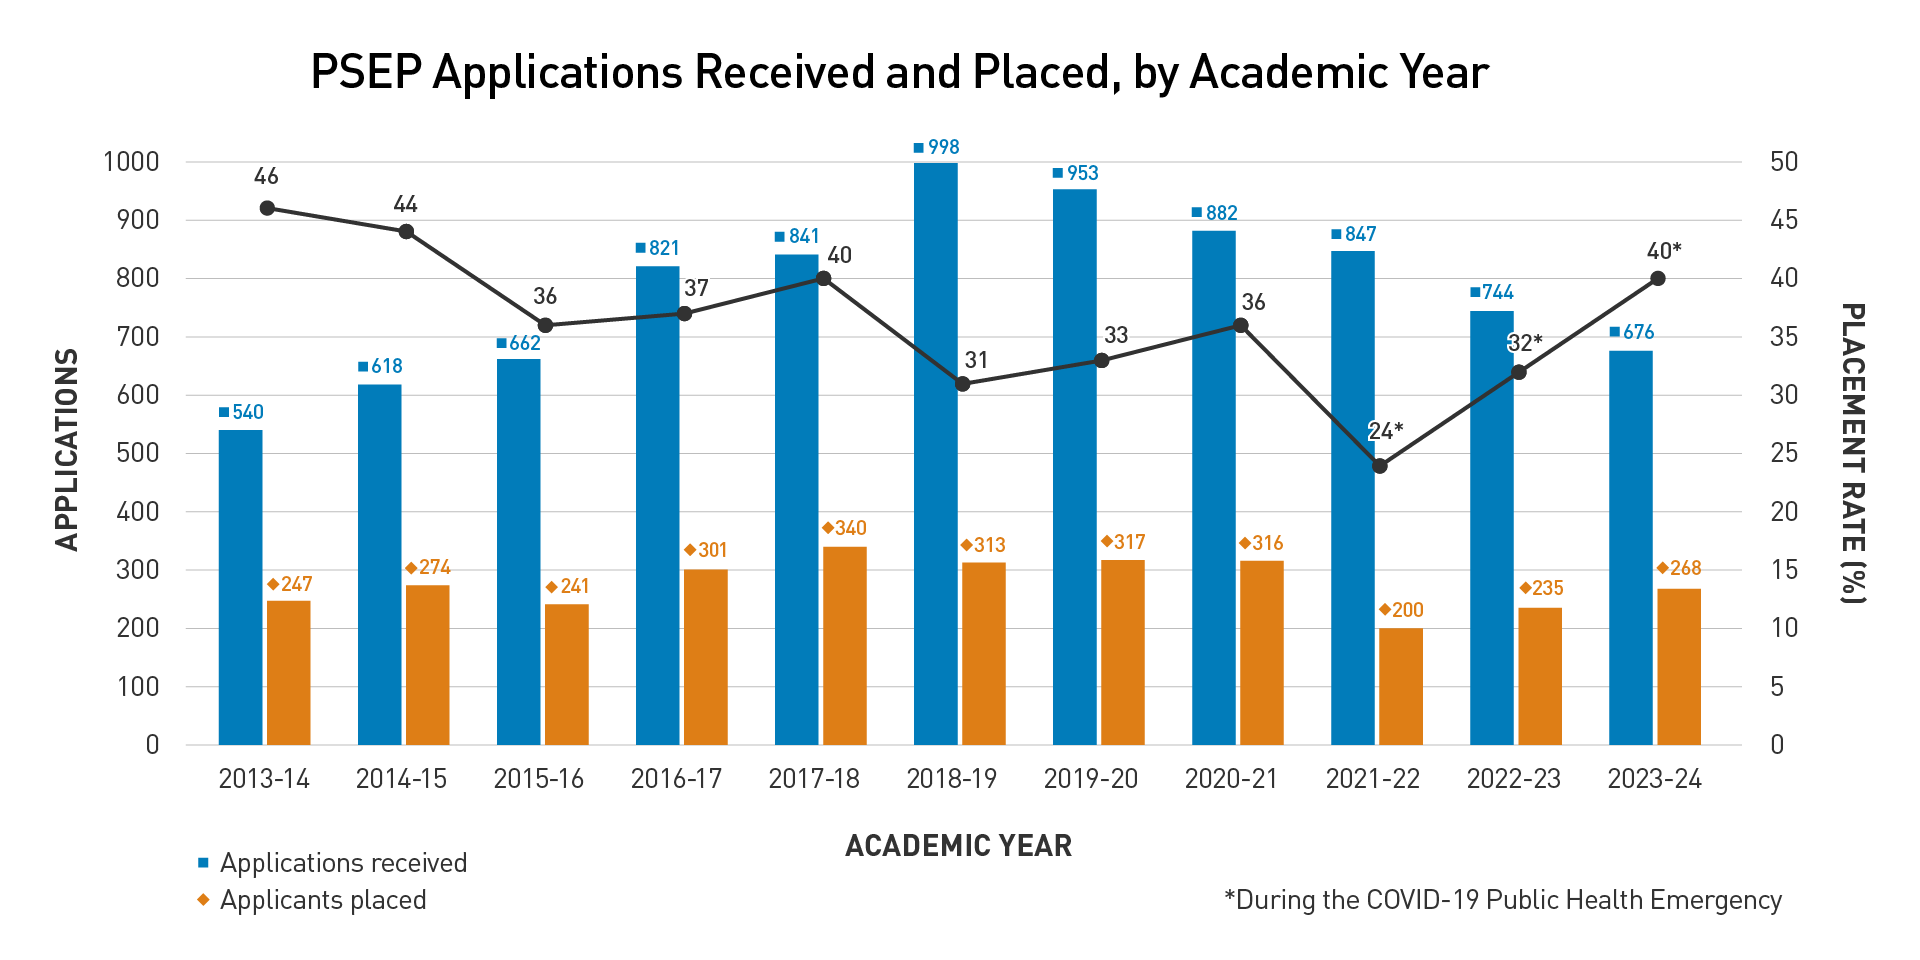 PSEP Applications Received and Placed, by Academic Year